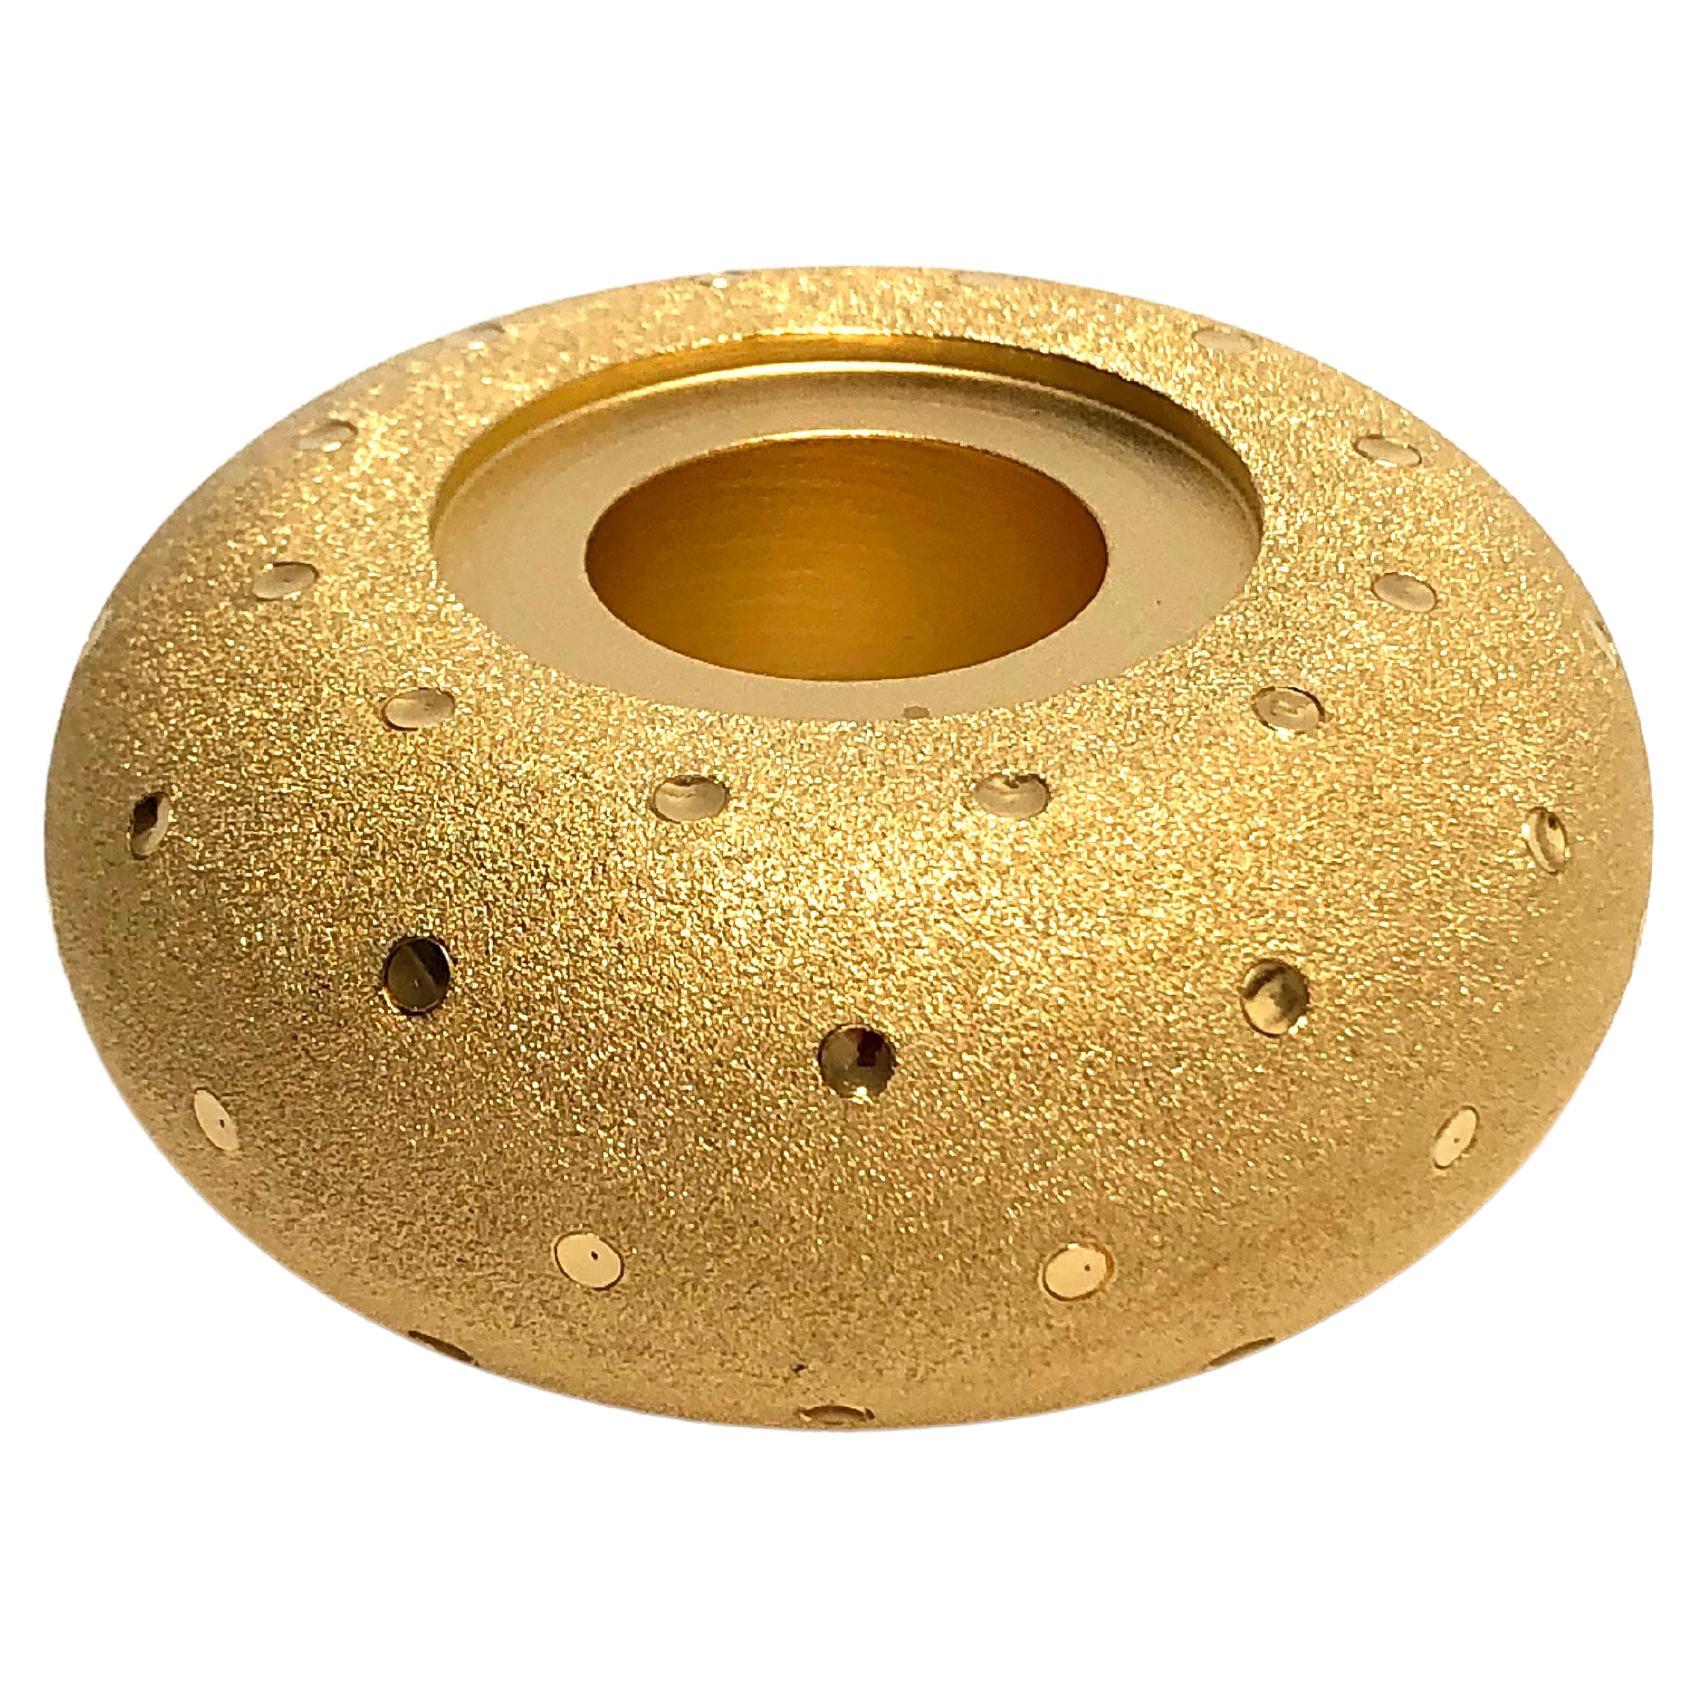 Gold-plated Candleholder Born to Be a Light, "Precious Donut" from TOTEM N°1 For Sale